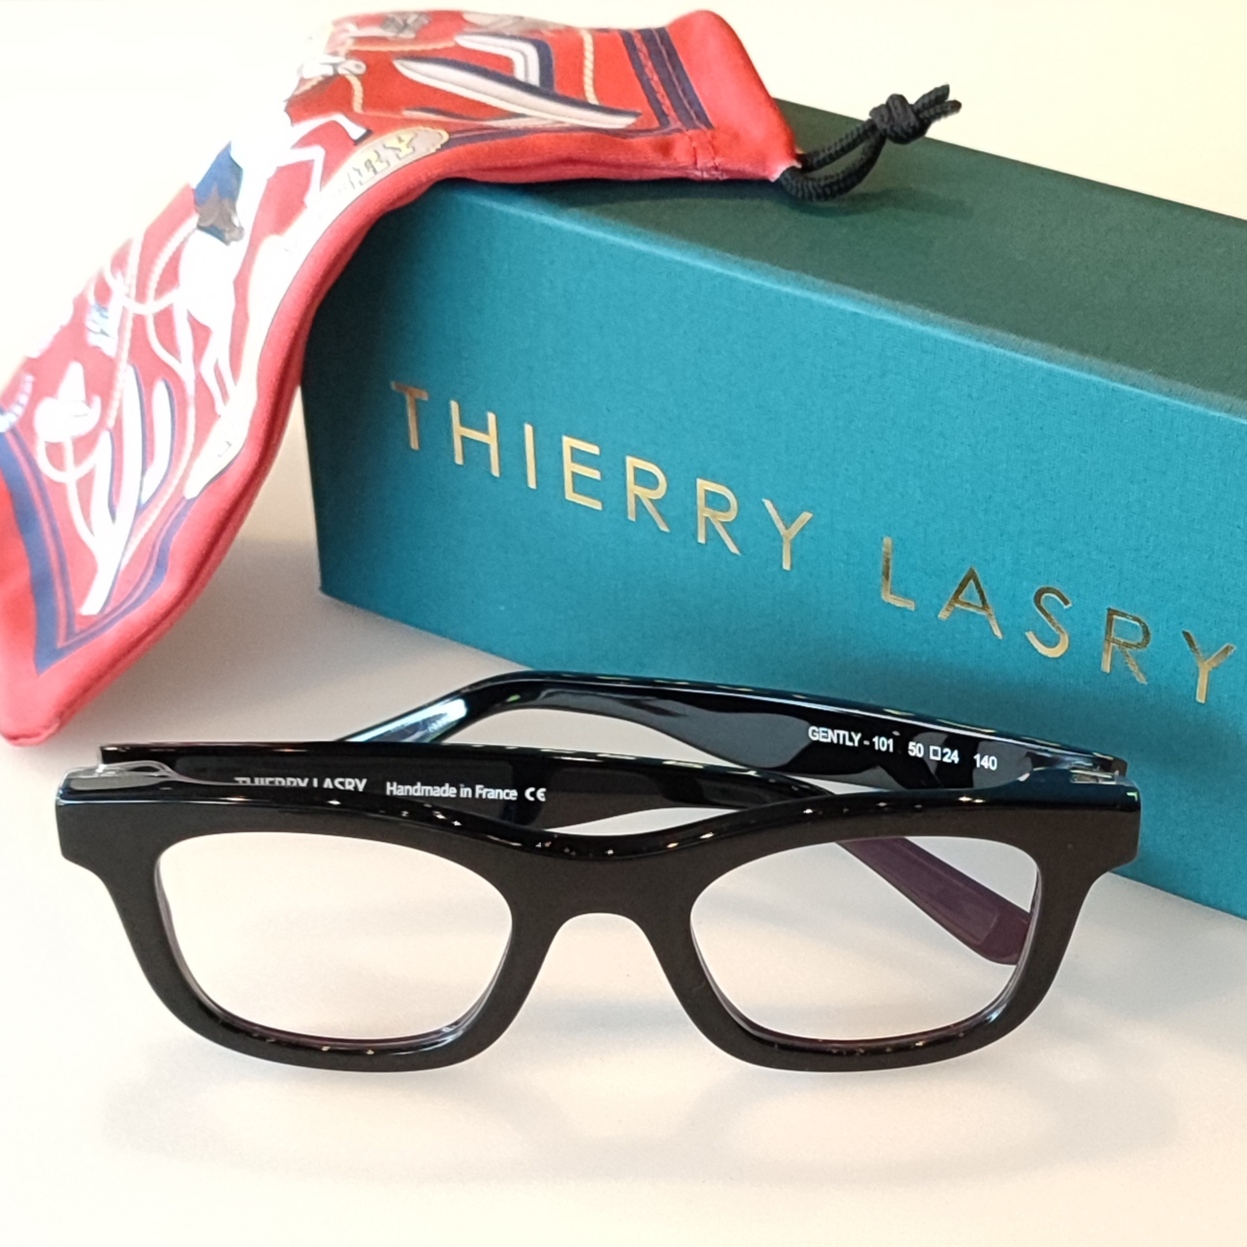 Theirry Lasry Gently frame in colour 101